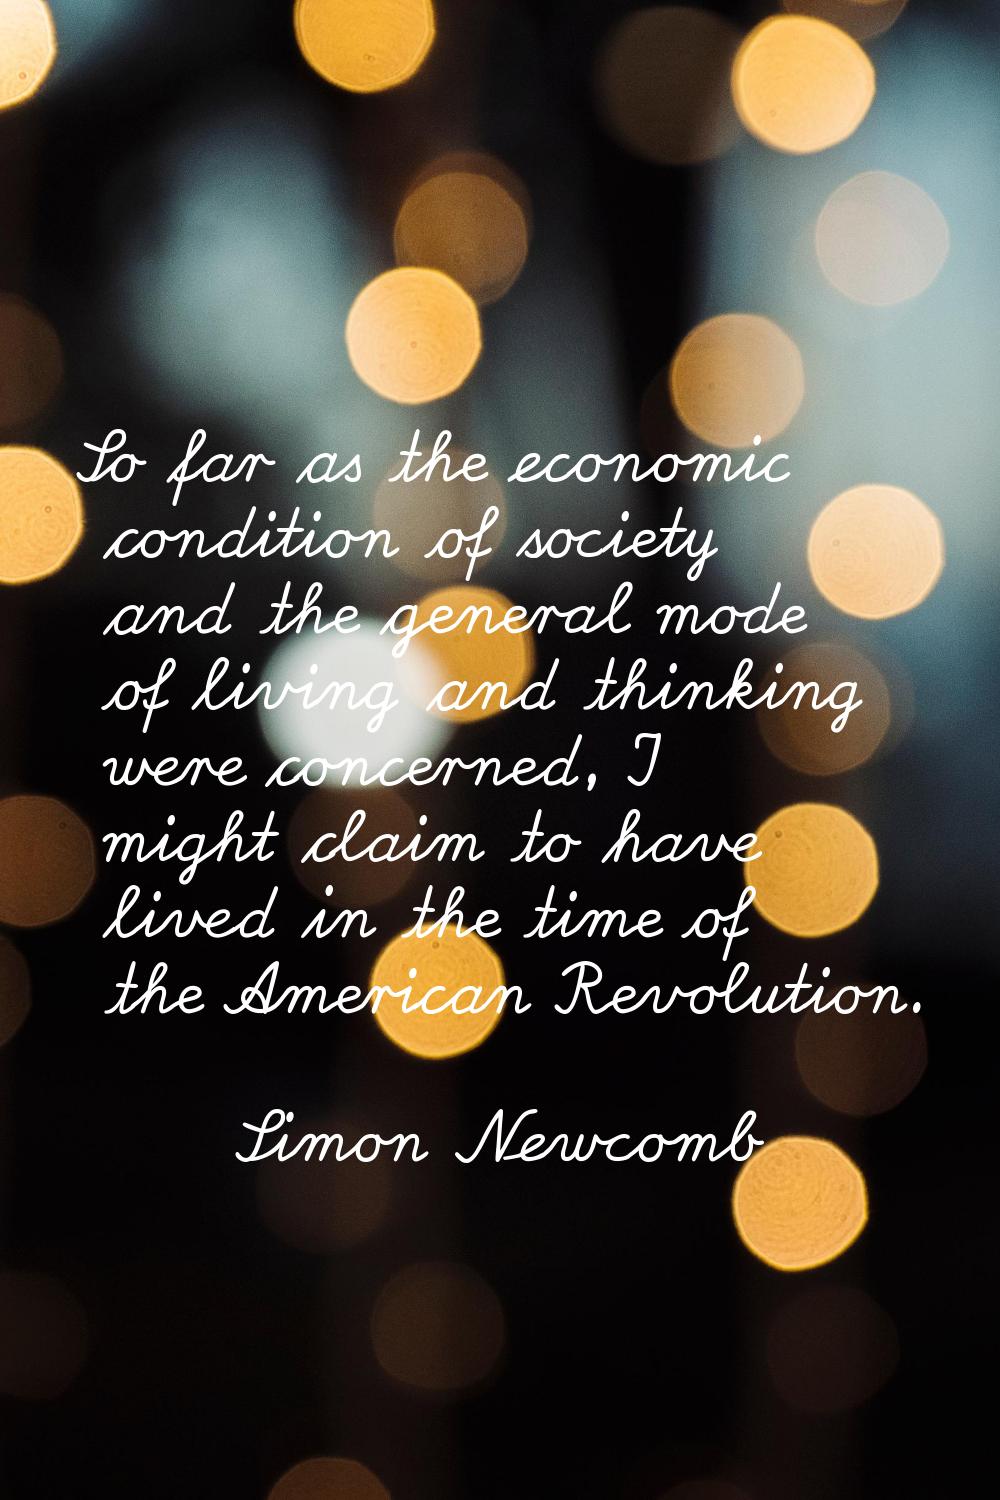 So far as the economic condition of society and the general mode of living and thinking were concer